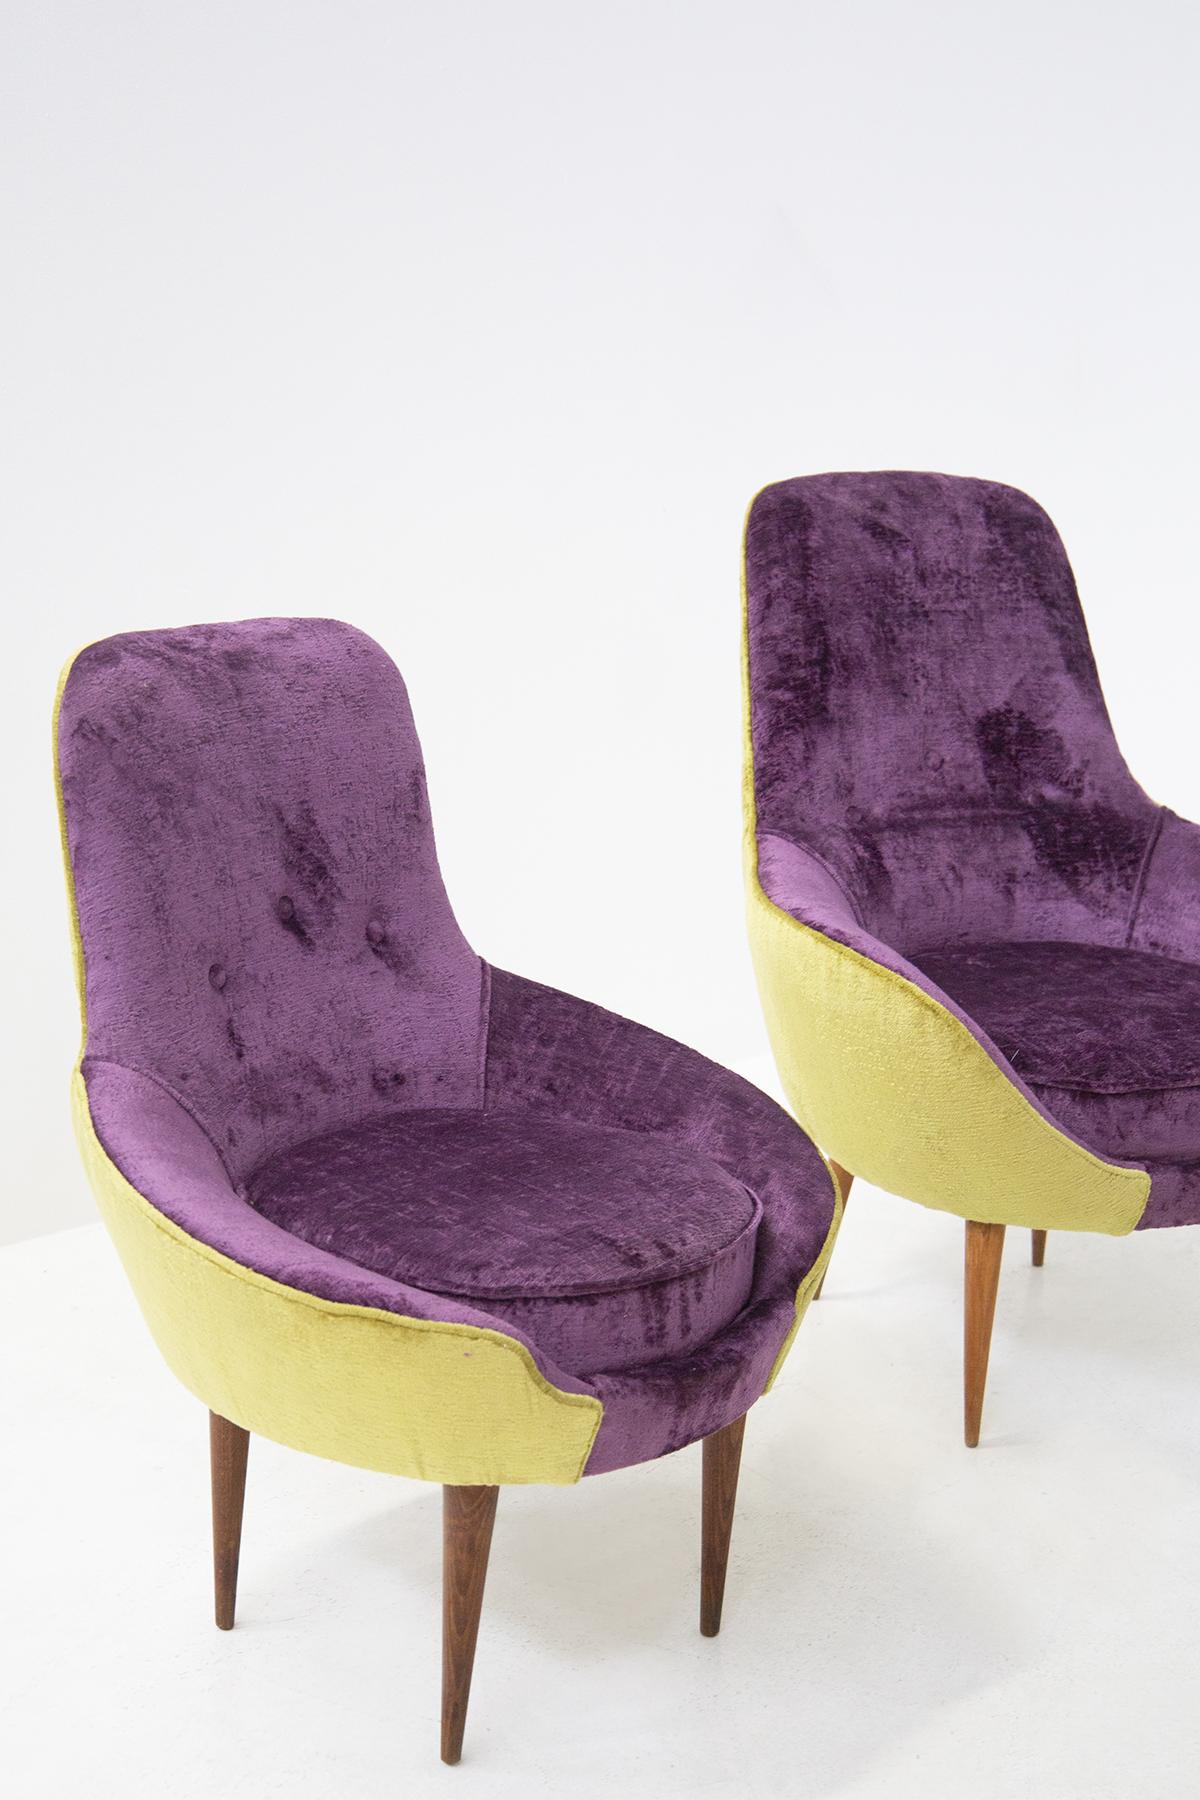 Small Vintage Wooden Armchairs in Velvet Purple and Green with Pouf In Good Condition For Sale In Milano, IT